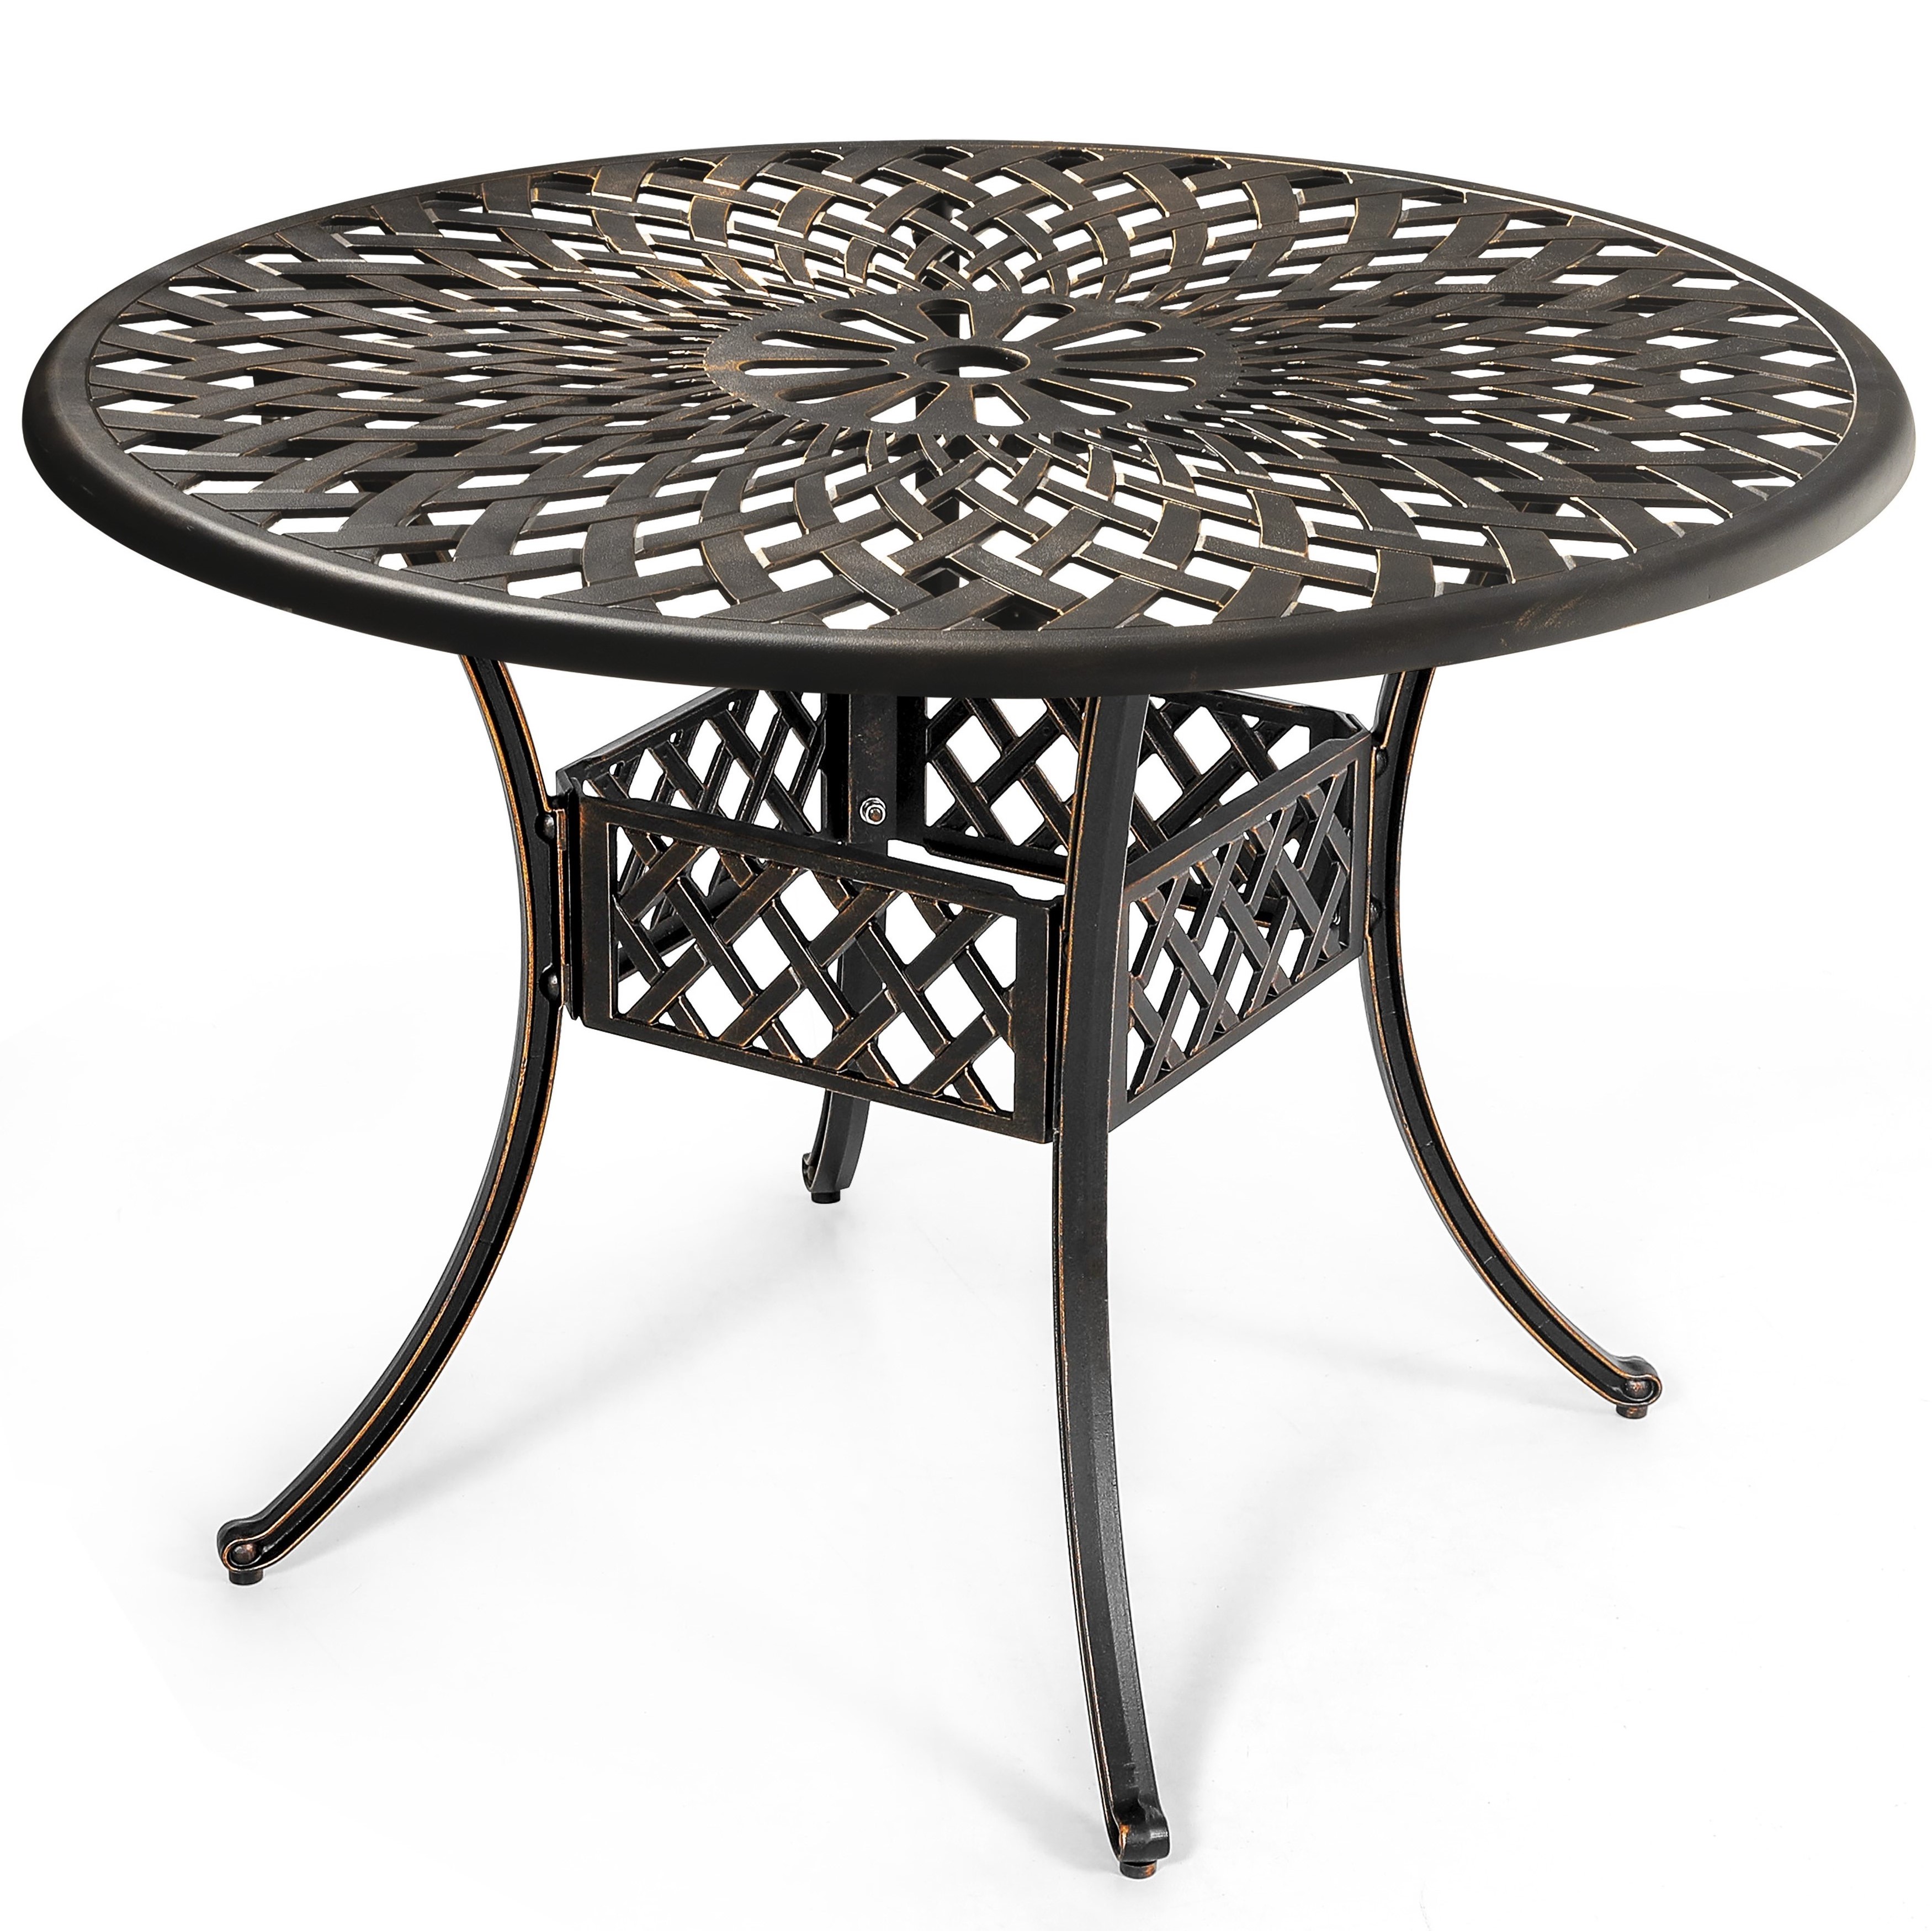 Nuu Garden 42" Cast Aluminum Round Outdoor Dining Table,Patio Bistro Table with Umbrella Hole Conversation Table, Black with Antique Bronze at The Edge - image 1 of 9